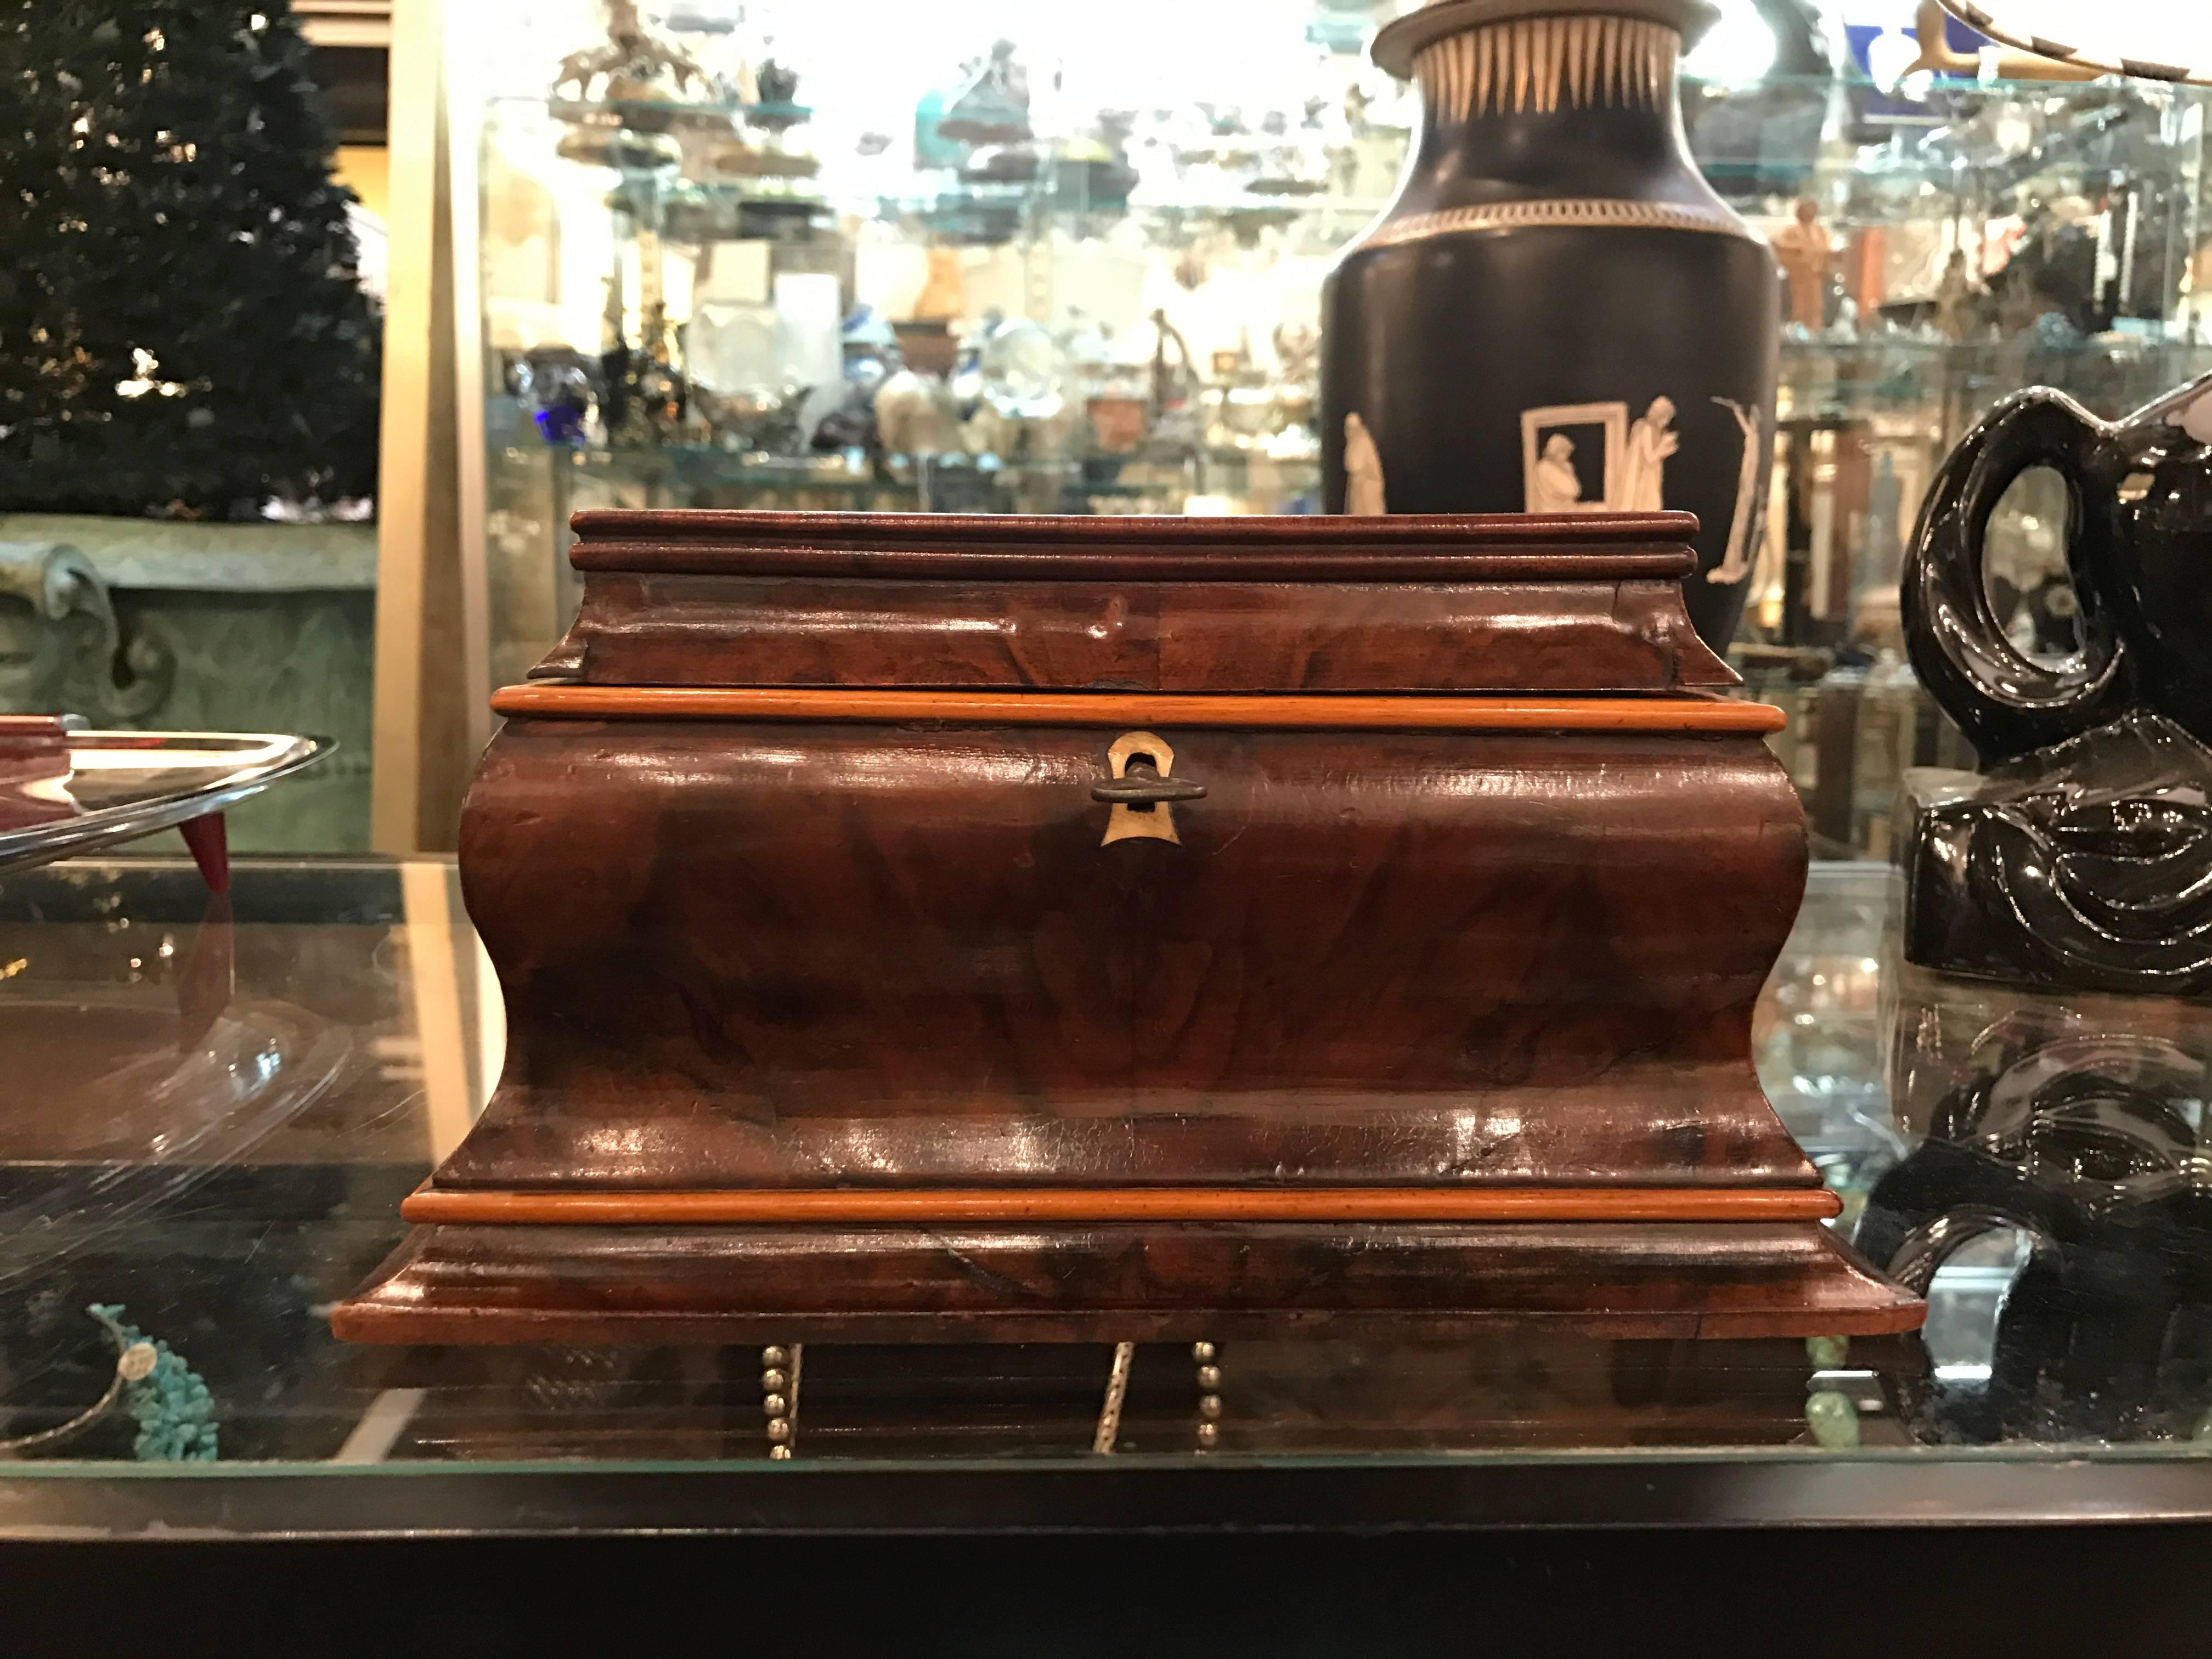 Shapely hinged lid box with figurative walnut wood exterior. The fitted tray is maple with an interior mirror and lower storage. The key is original and the lock is working.